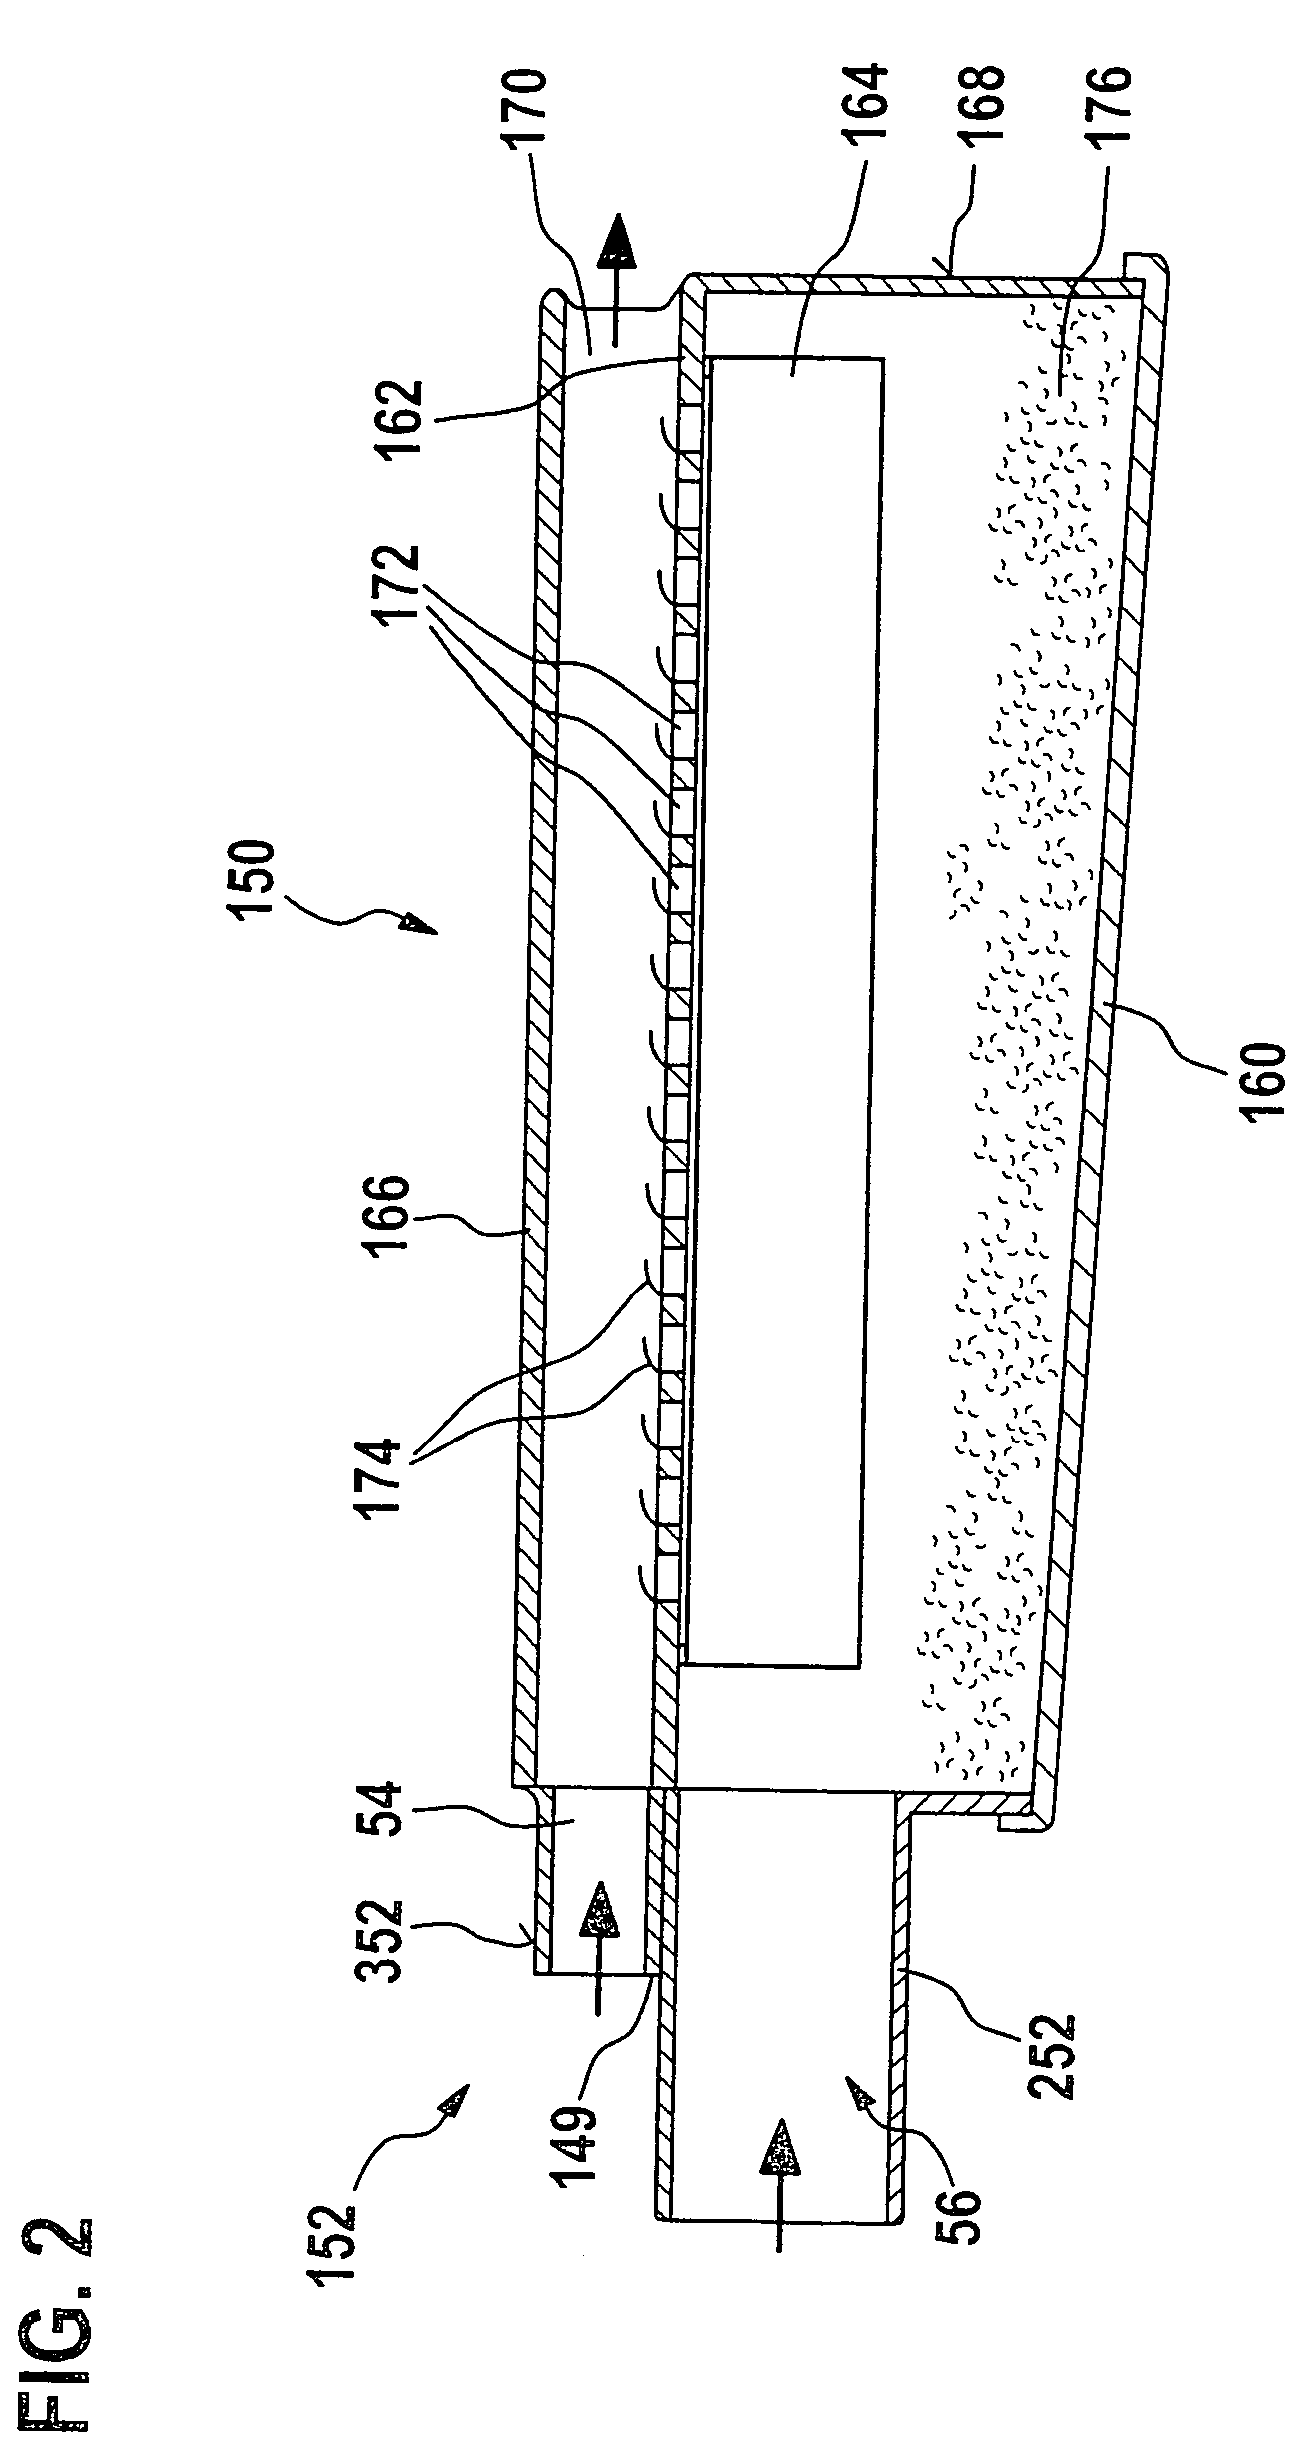 Hand-held machine tool comprising a dust box